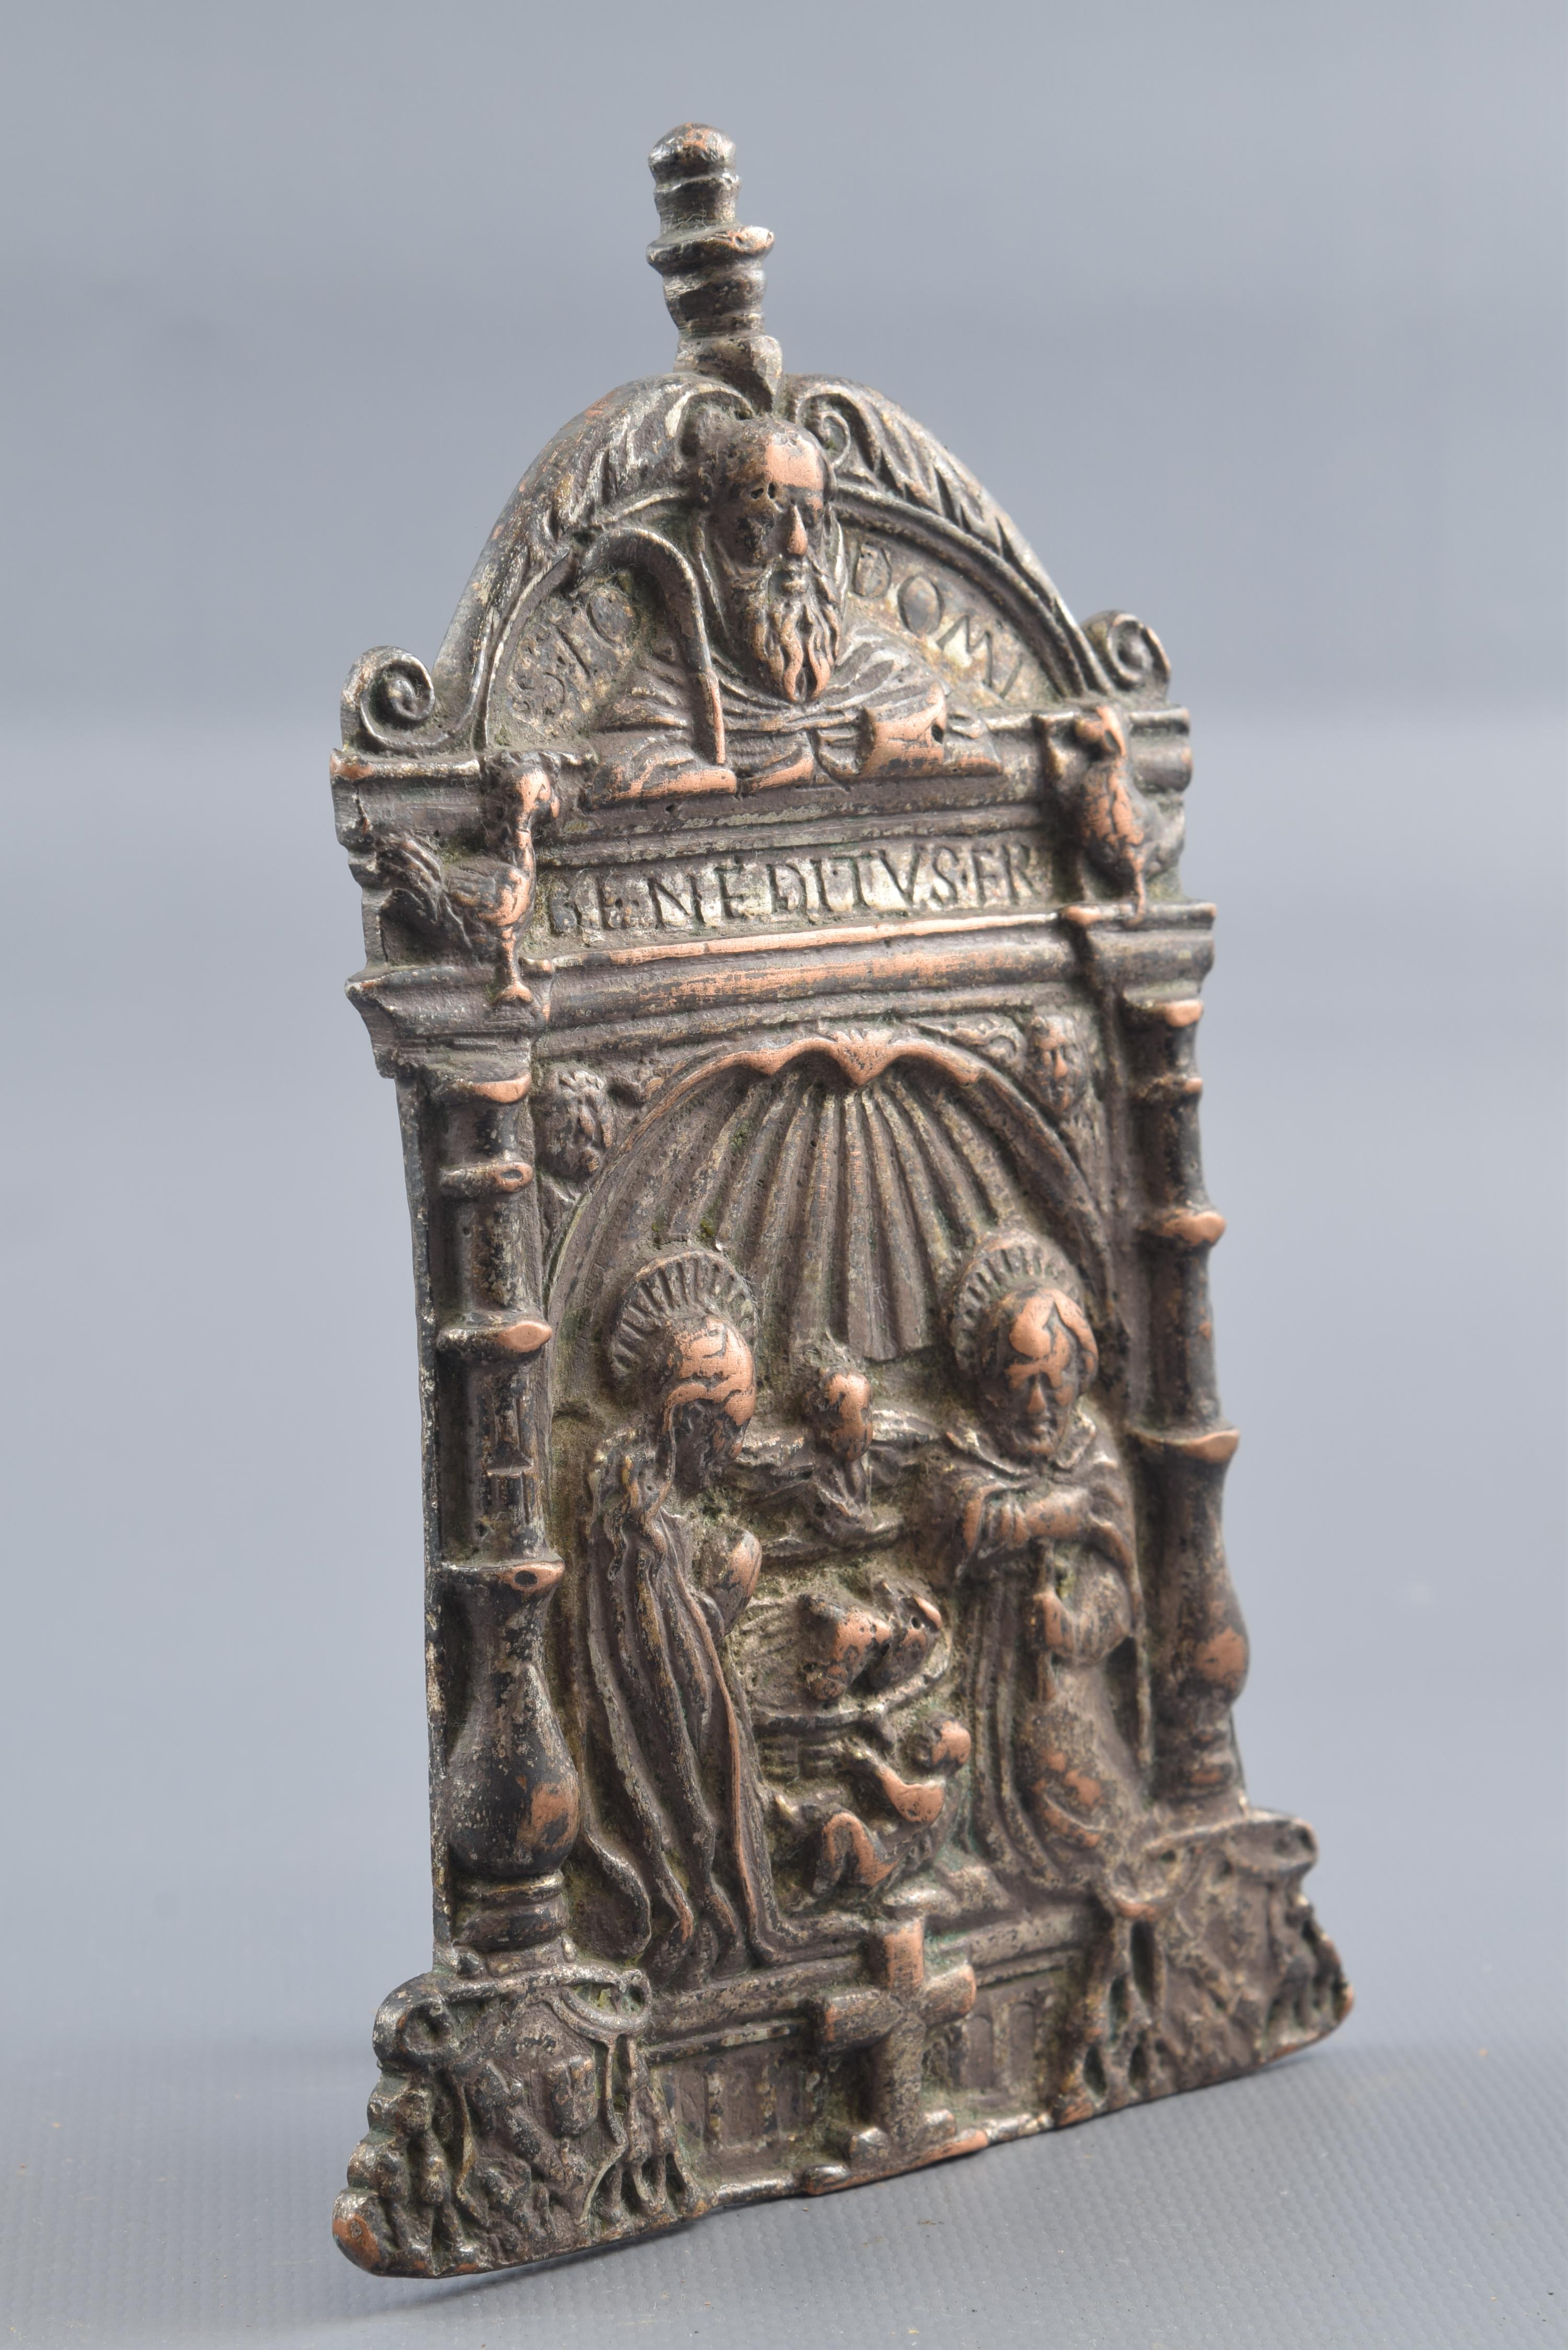 Paper holder bronze, 16th century.
Bronze paper holder with a flat curved handle on the back that features a relief decoration organized in the front through an architectural composition with a classical influence usual in the Renaissance. Under the